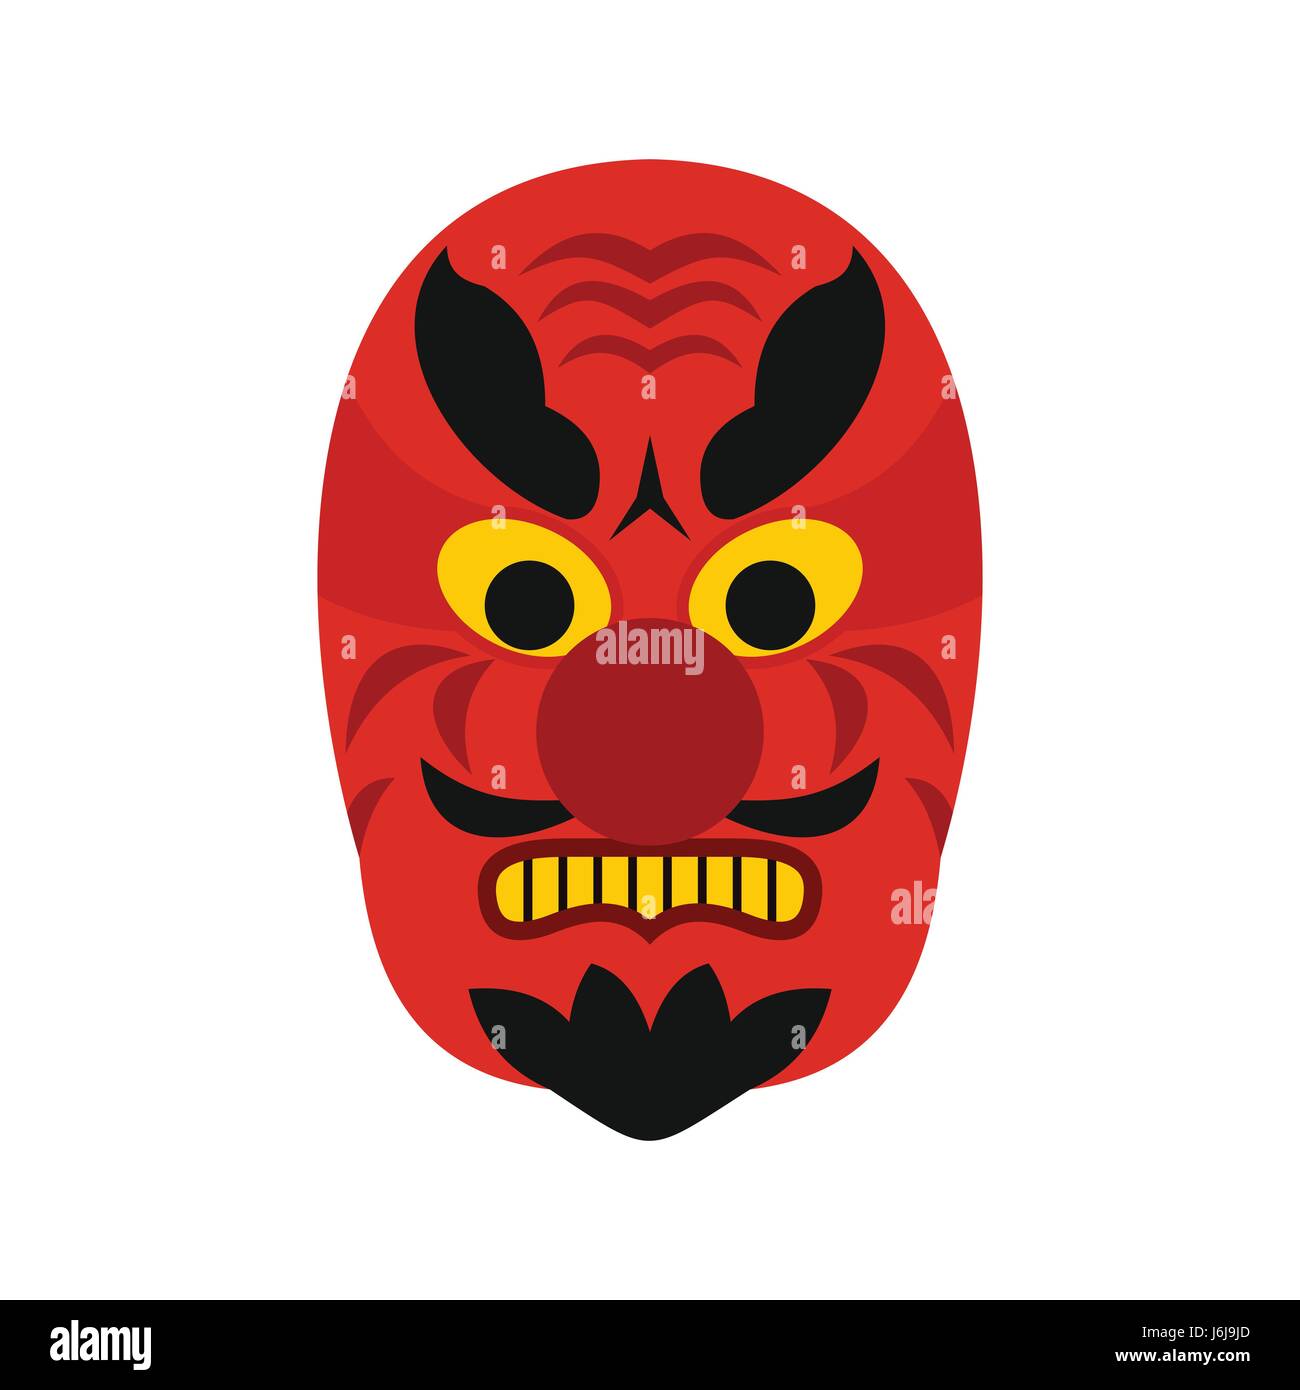 Pink Blue Ogre Troll Face Traditional Japanese Folklore Demon Theatre  Culture Halloween Horror Mask Stock Photo - Download Image Now - iStock